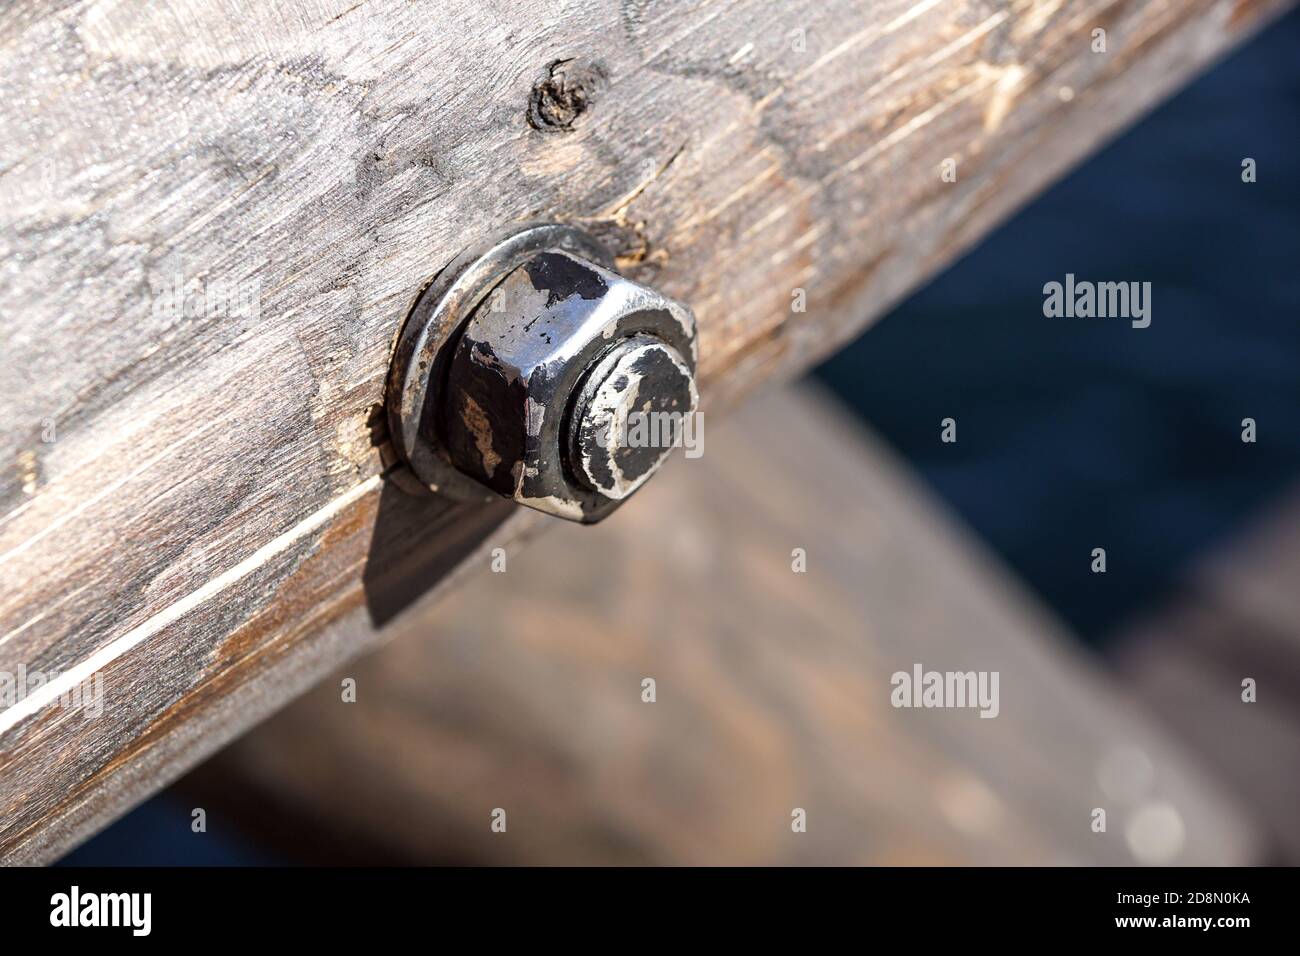 Nut and bolt on a wooden background. Close up detail. Stock Photo